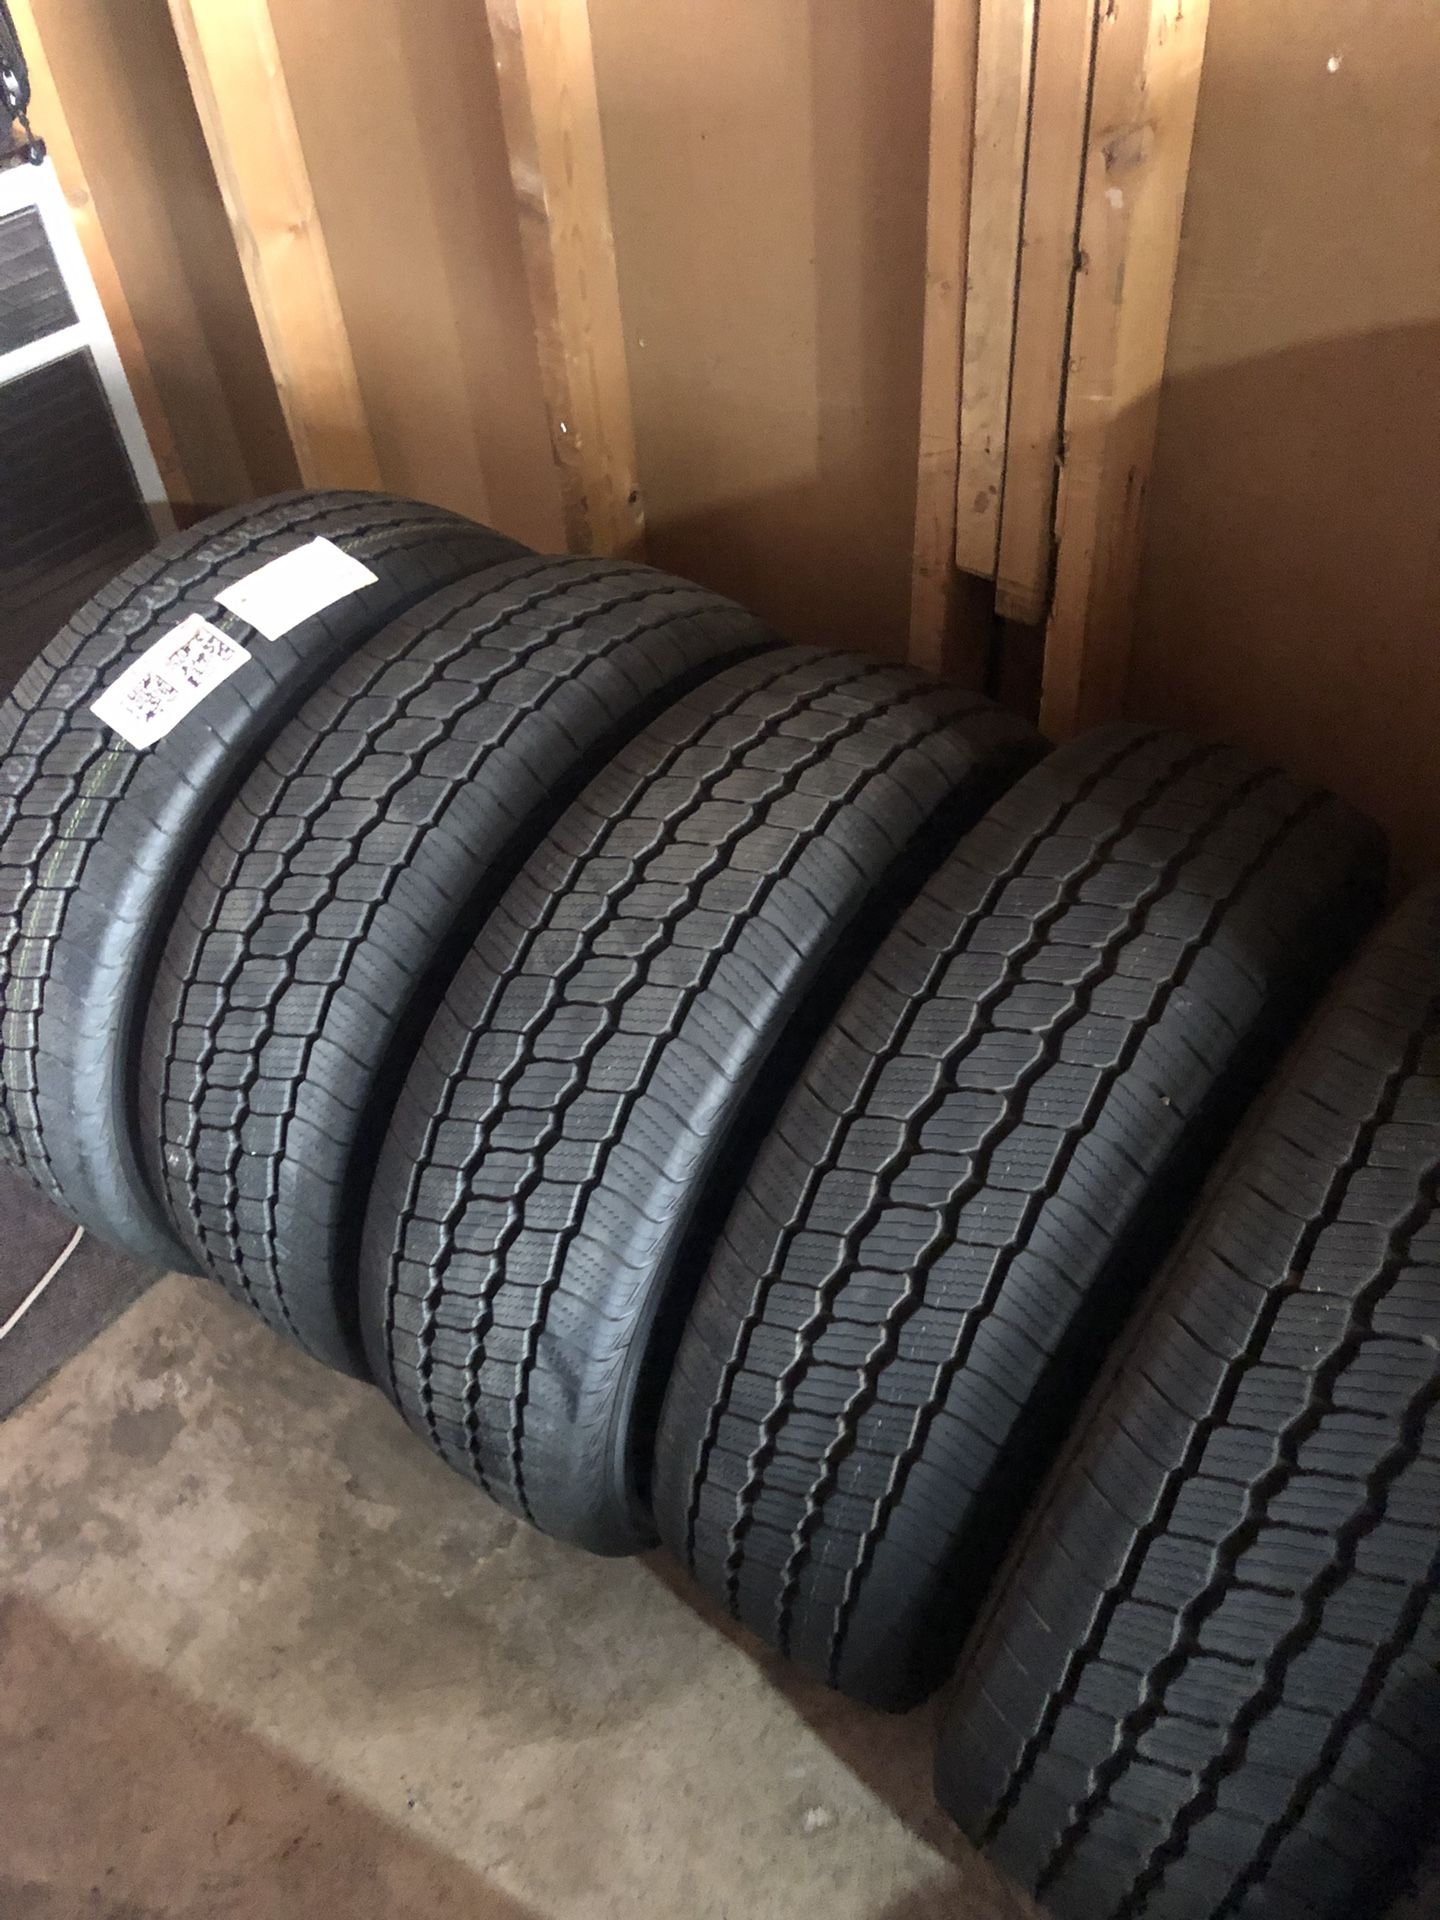 5 New MBZ Sprinter LT 245 75 16 Load E 10 Ply Kumho CrugenHT51. This Is A Factory Take Off Tires. New. $800. 100% Complete. 